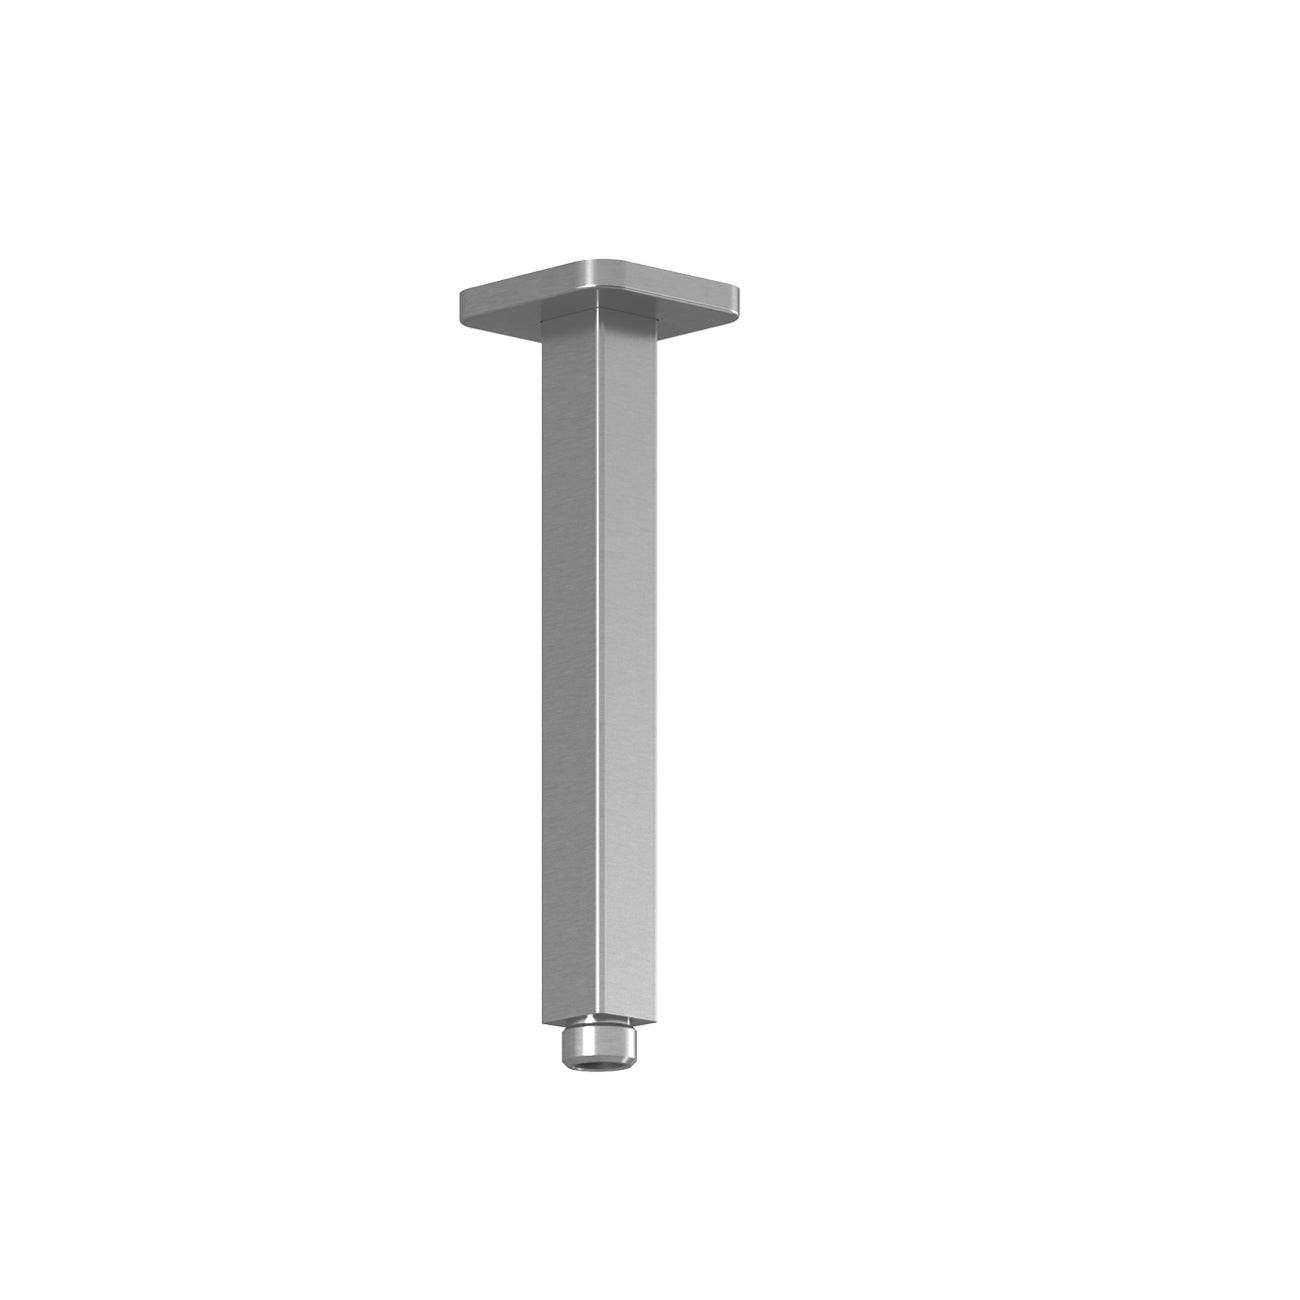 Kalia 8.87" Ceiling Square Shower Arm With Flange- Pure Nickel PVD